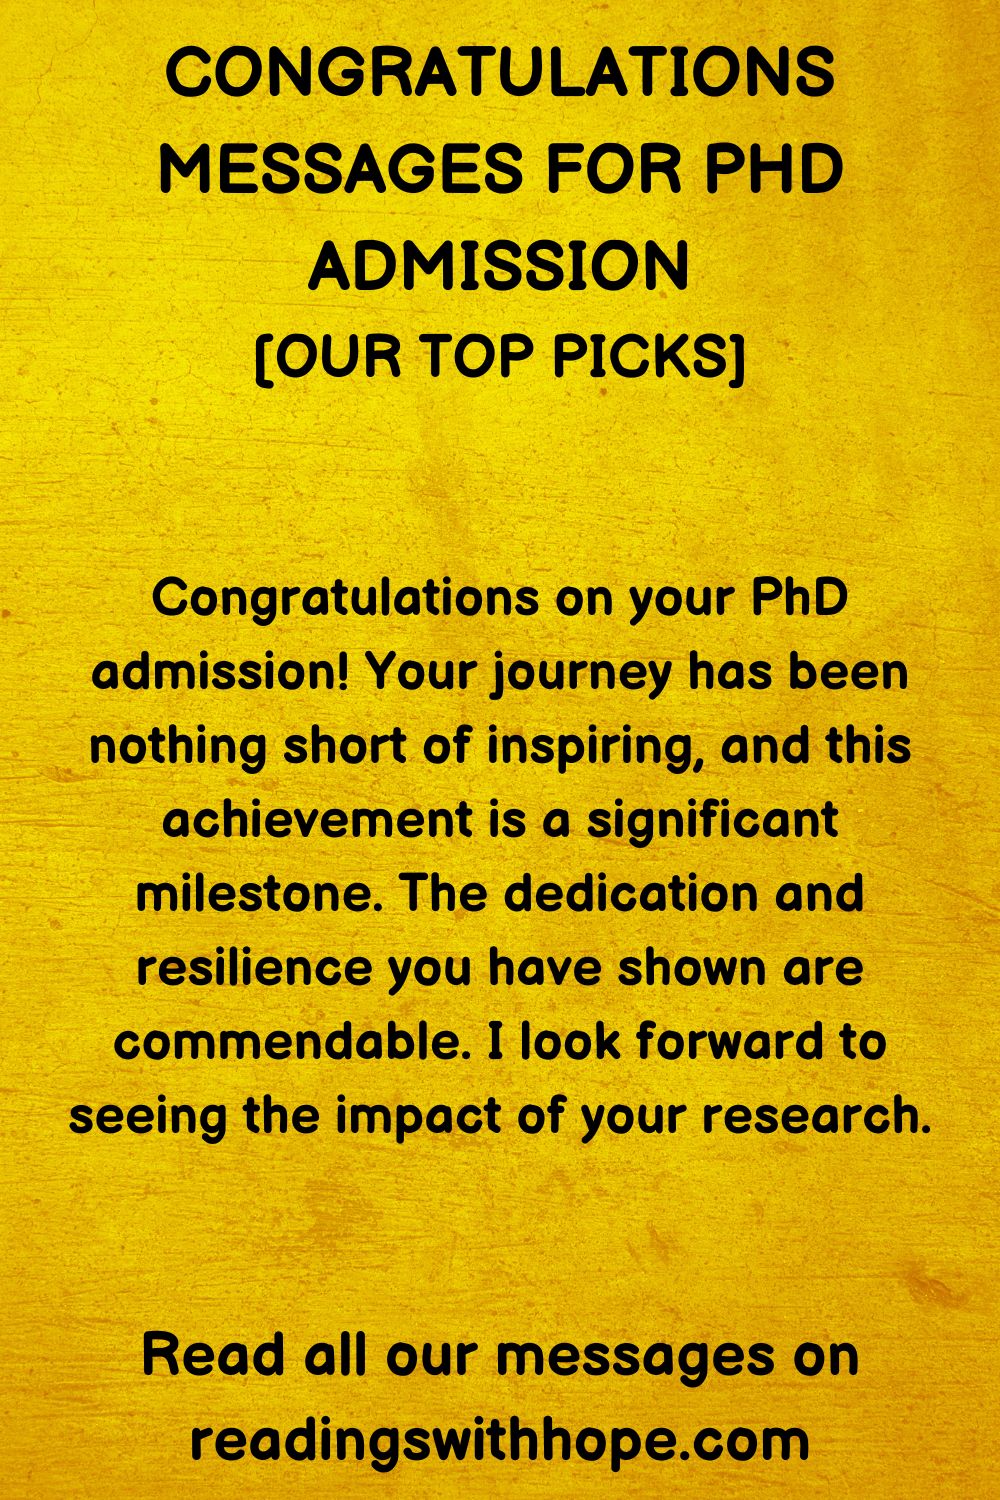 Congratulations Message for Phd Admission
